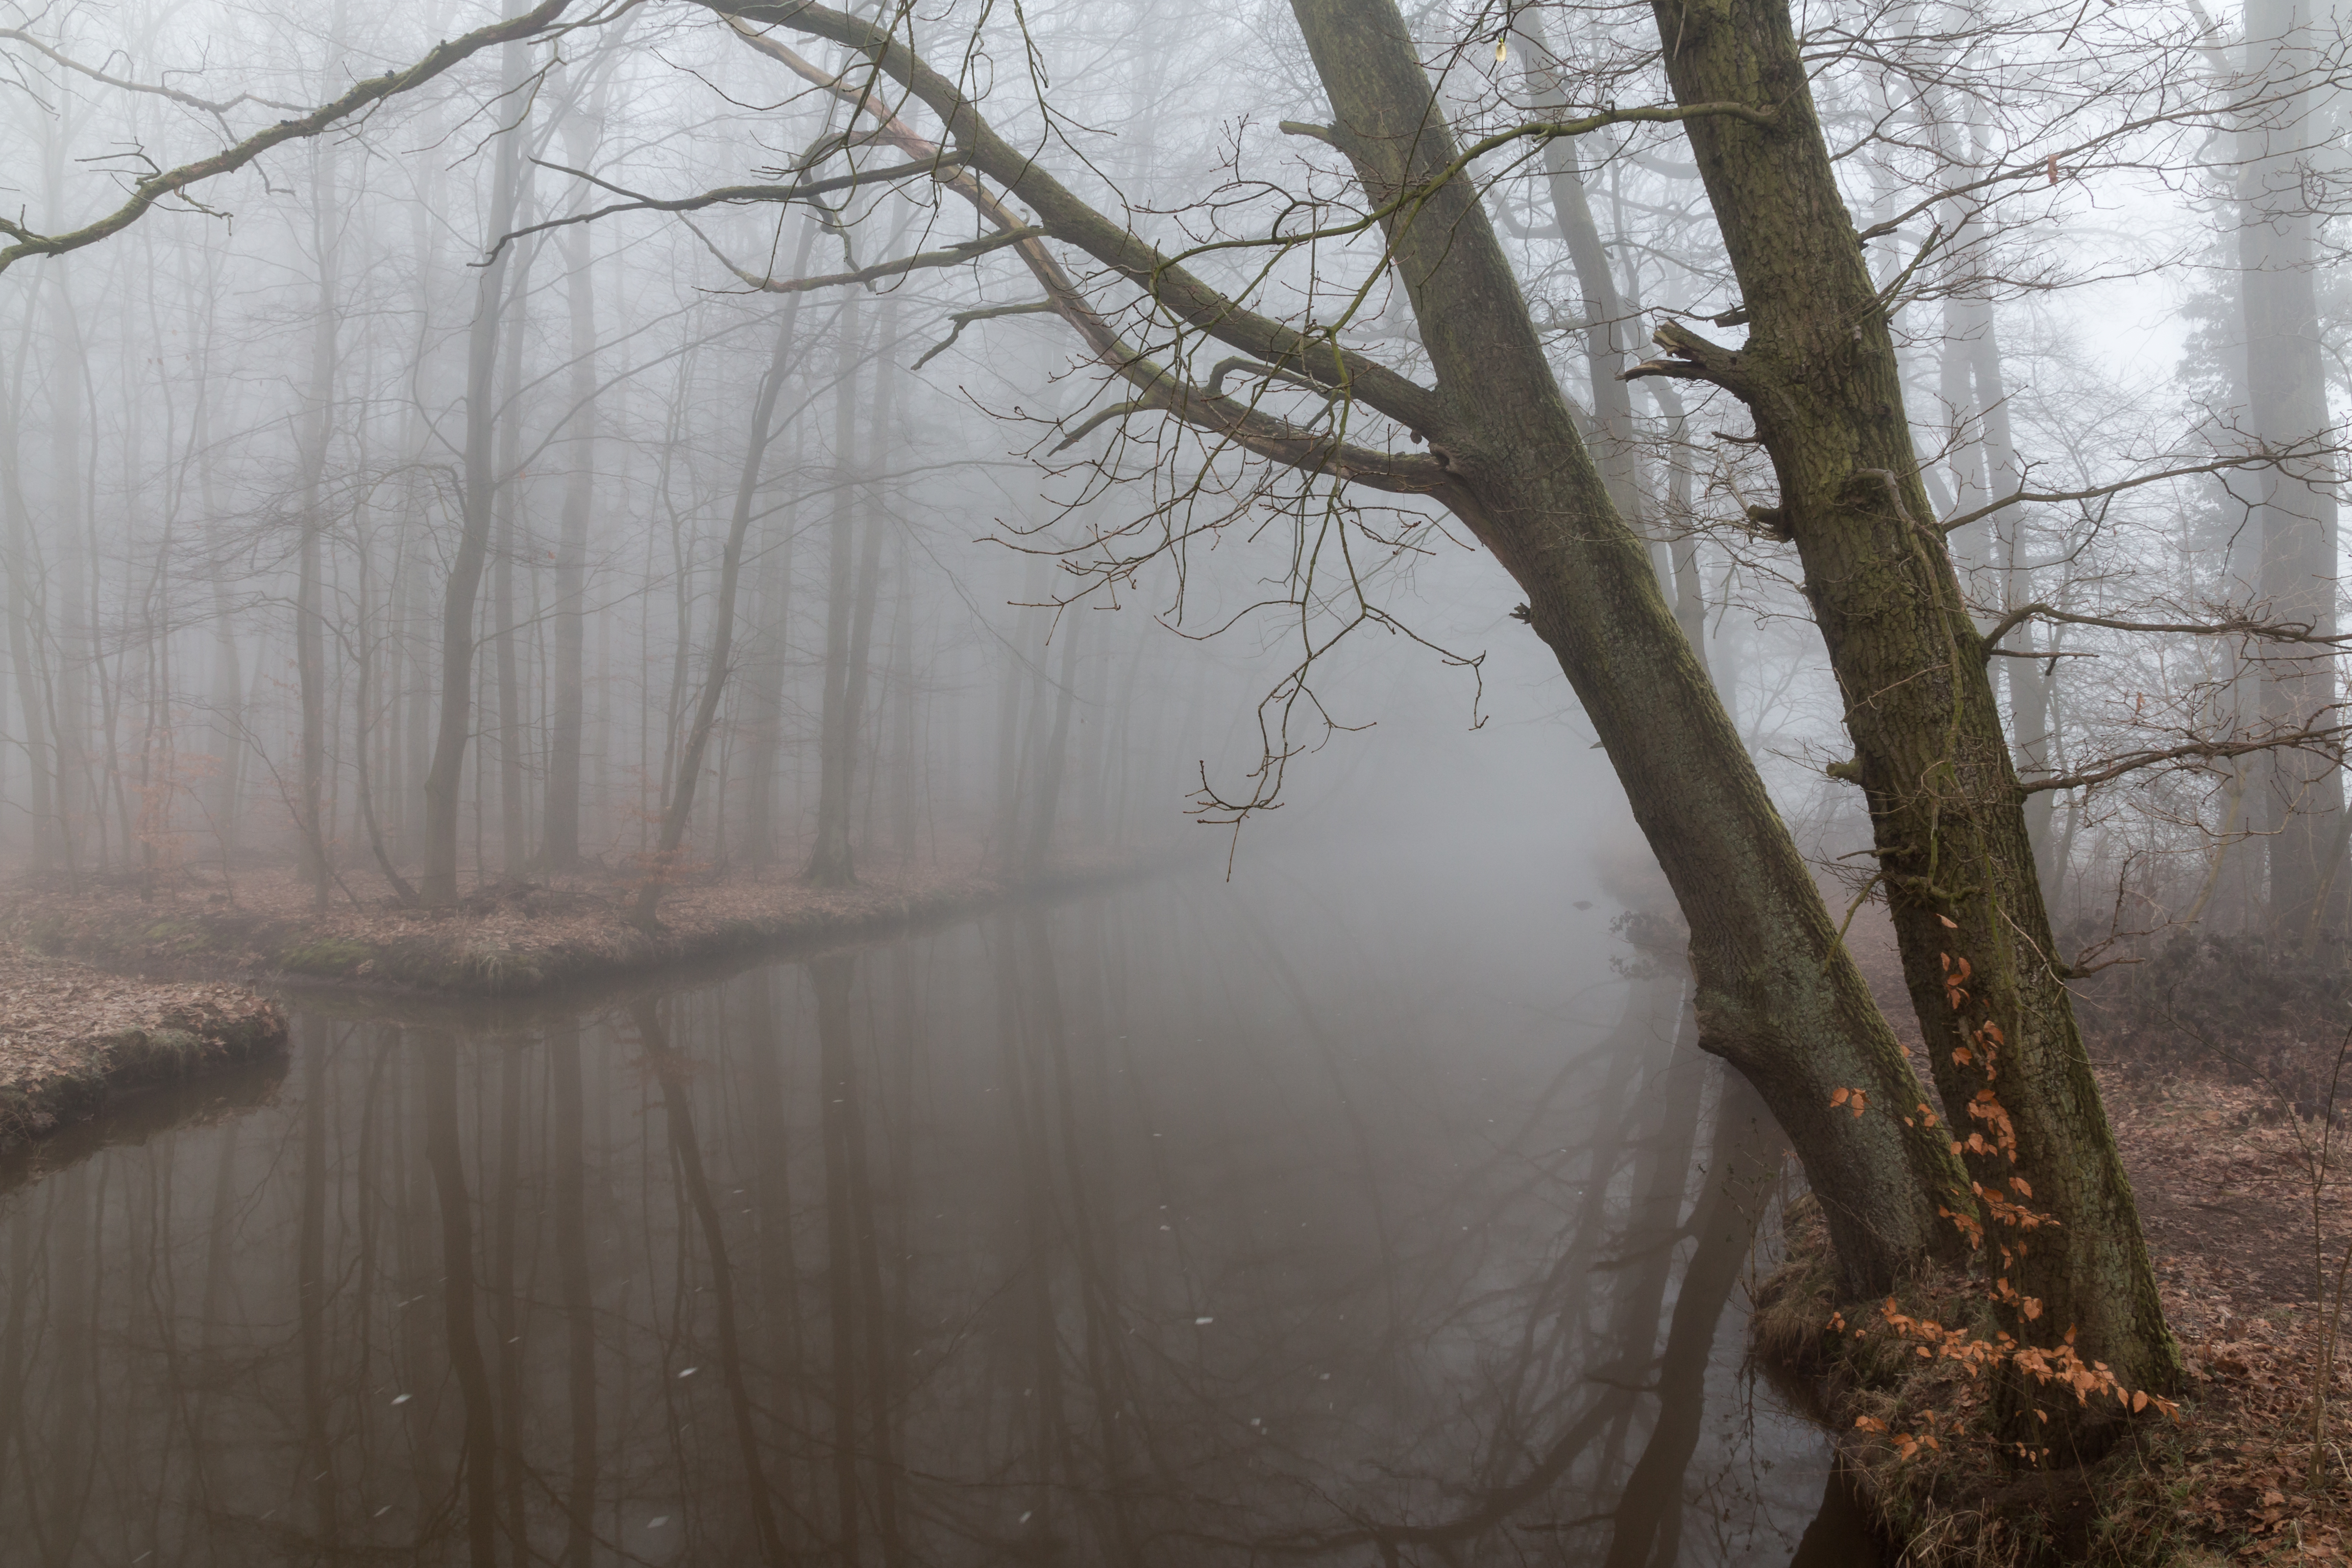 gloomy, nature, reflection, fog, branches, gloomily